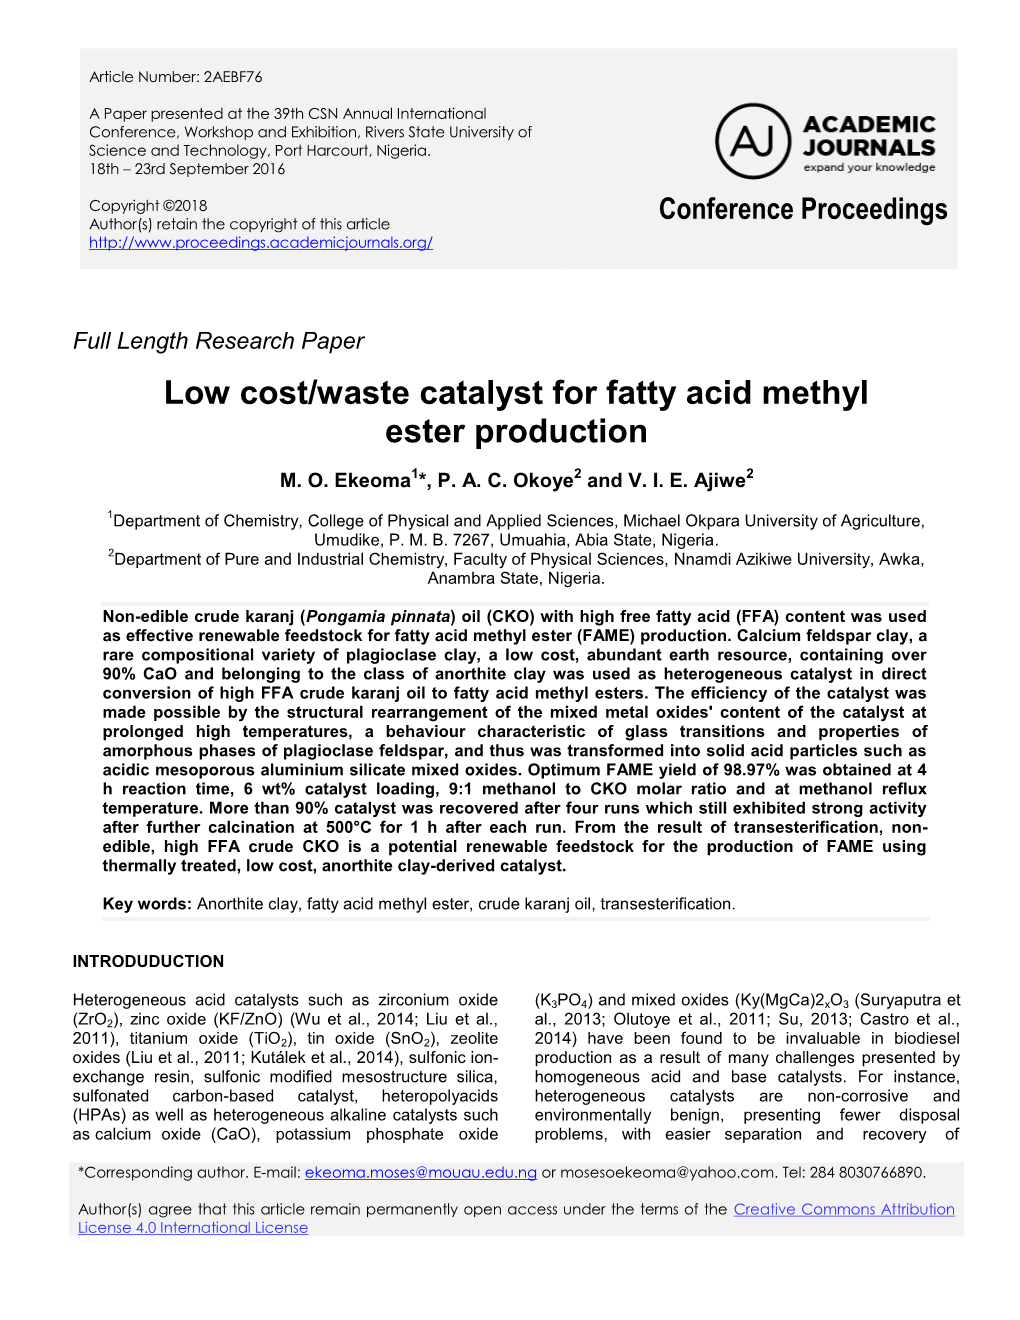 Low Cost/Waste Catalyst for Fatty Acid Methyl Ester Production